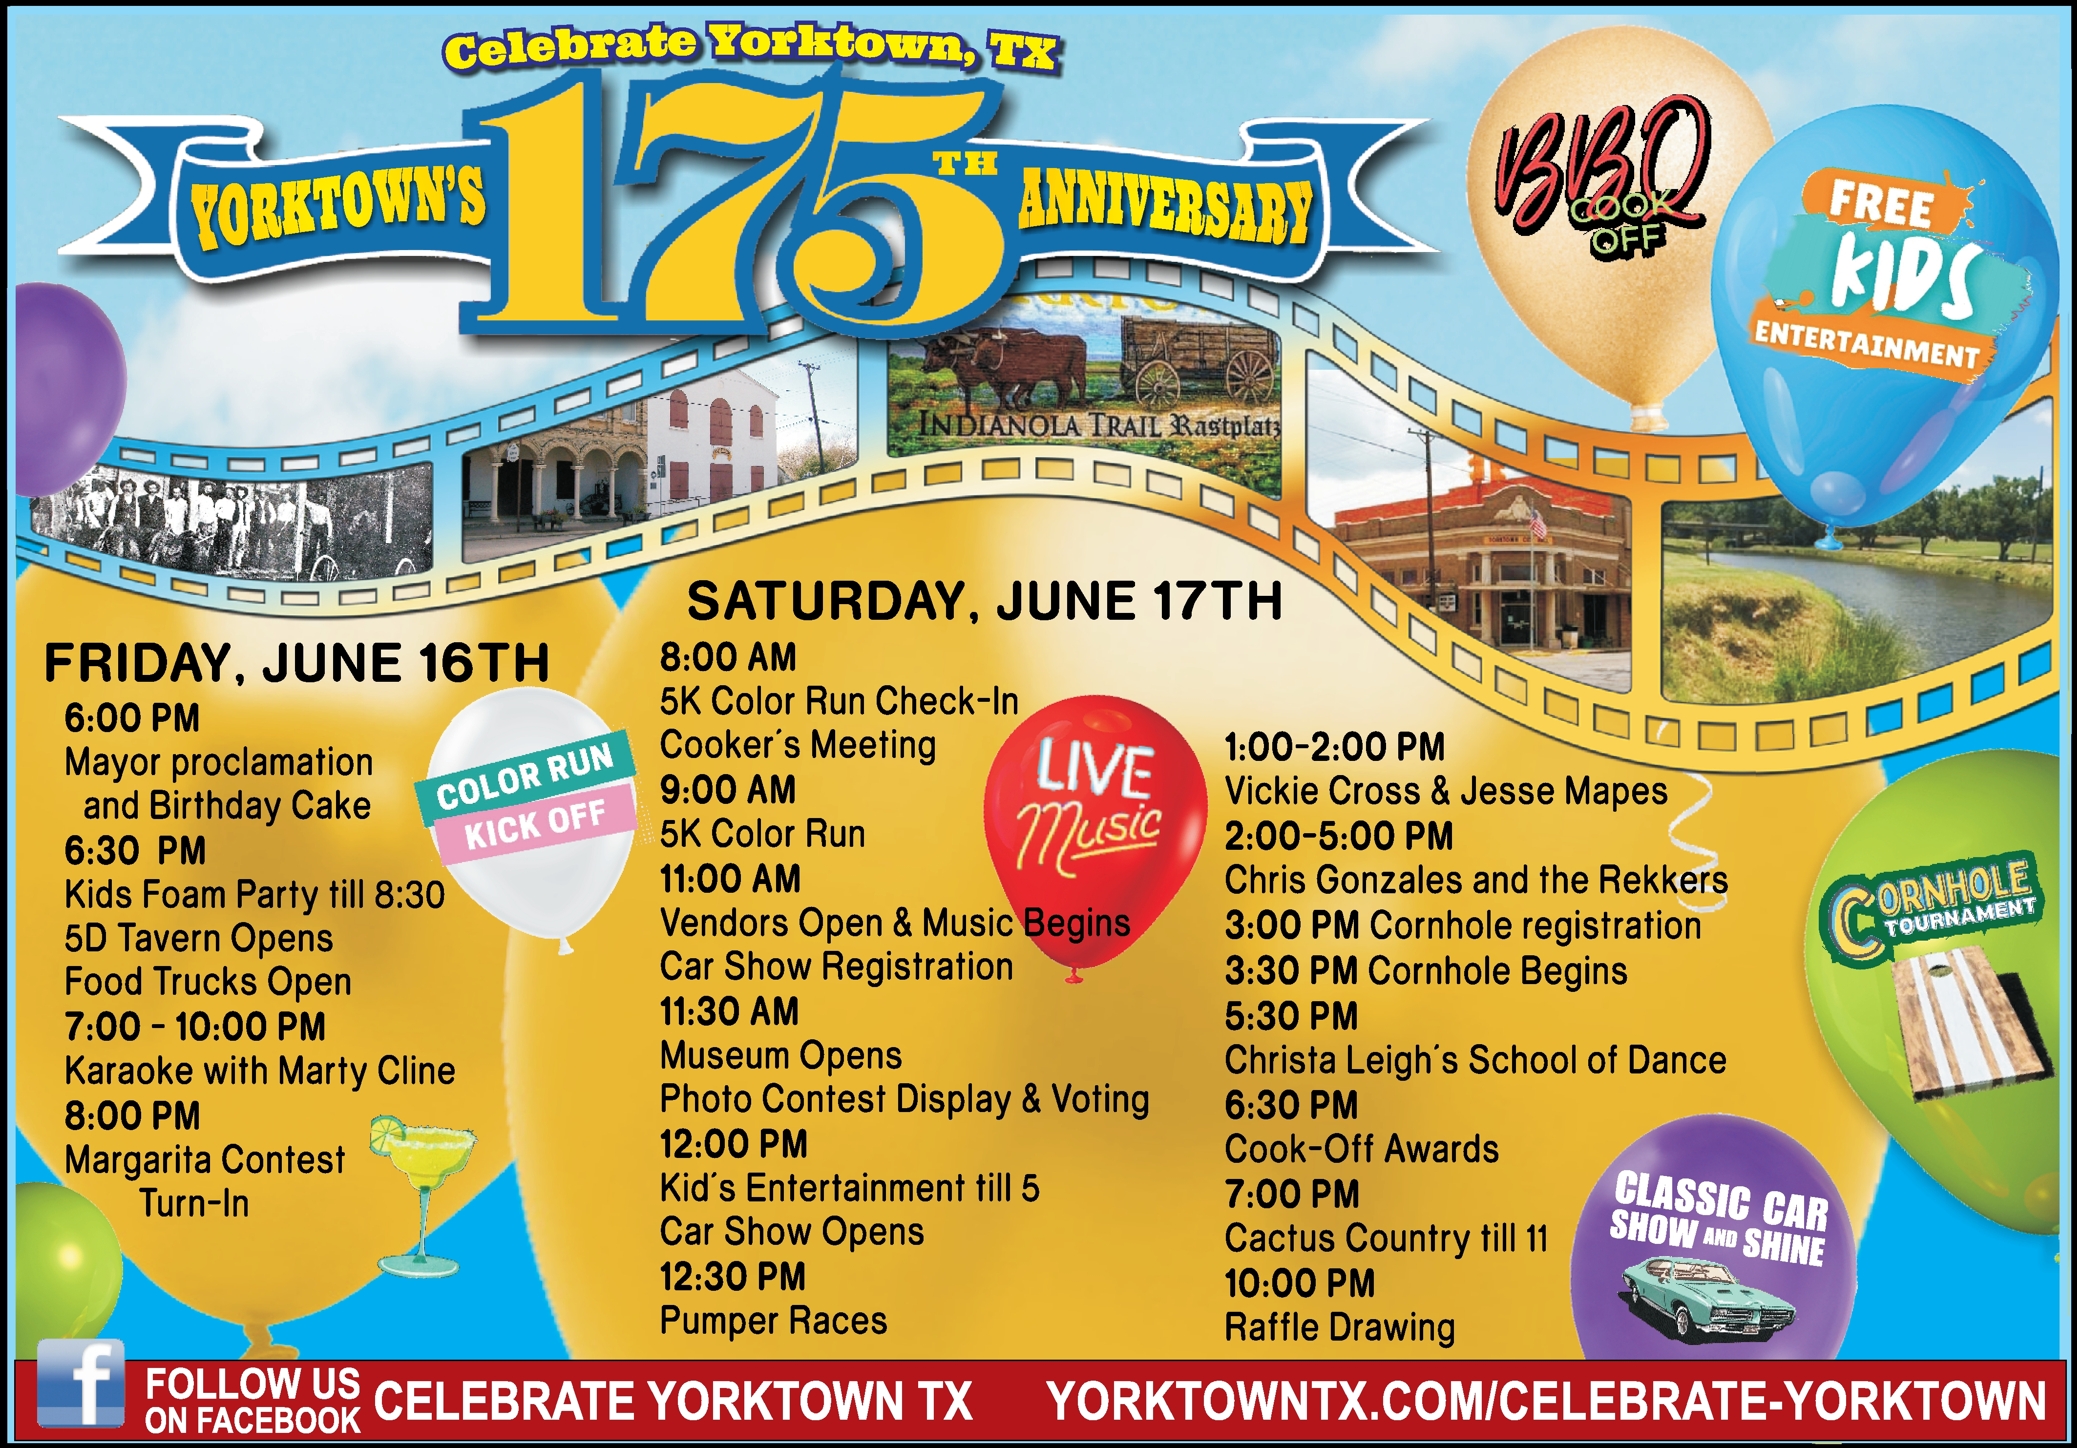 2 Big Days! Celebrate Yorktown TX Yorktowns 175th Anniversary is Friday, June 16th and Saturday, June 17th! Victoria+Crossroads Connection Magazine